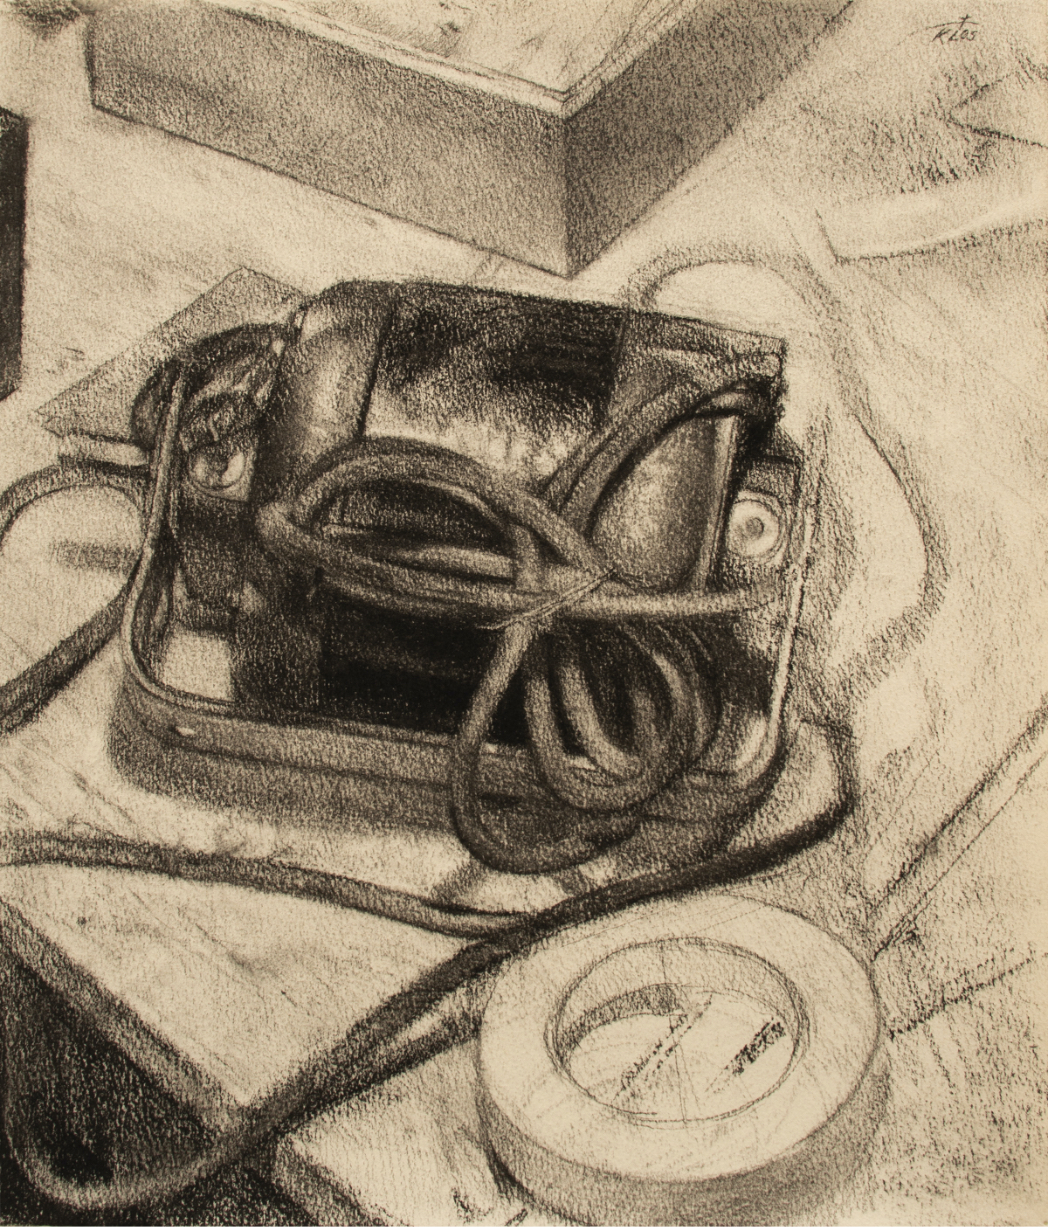 Motor / charcoal on paper / 12" x 9" / 2019 / Private Collection